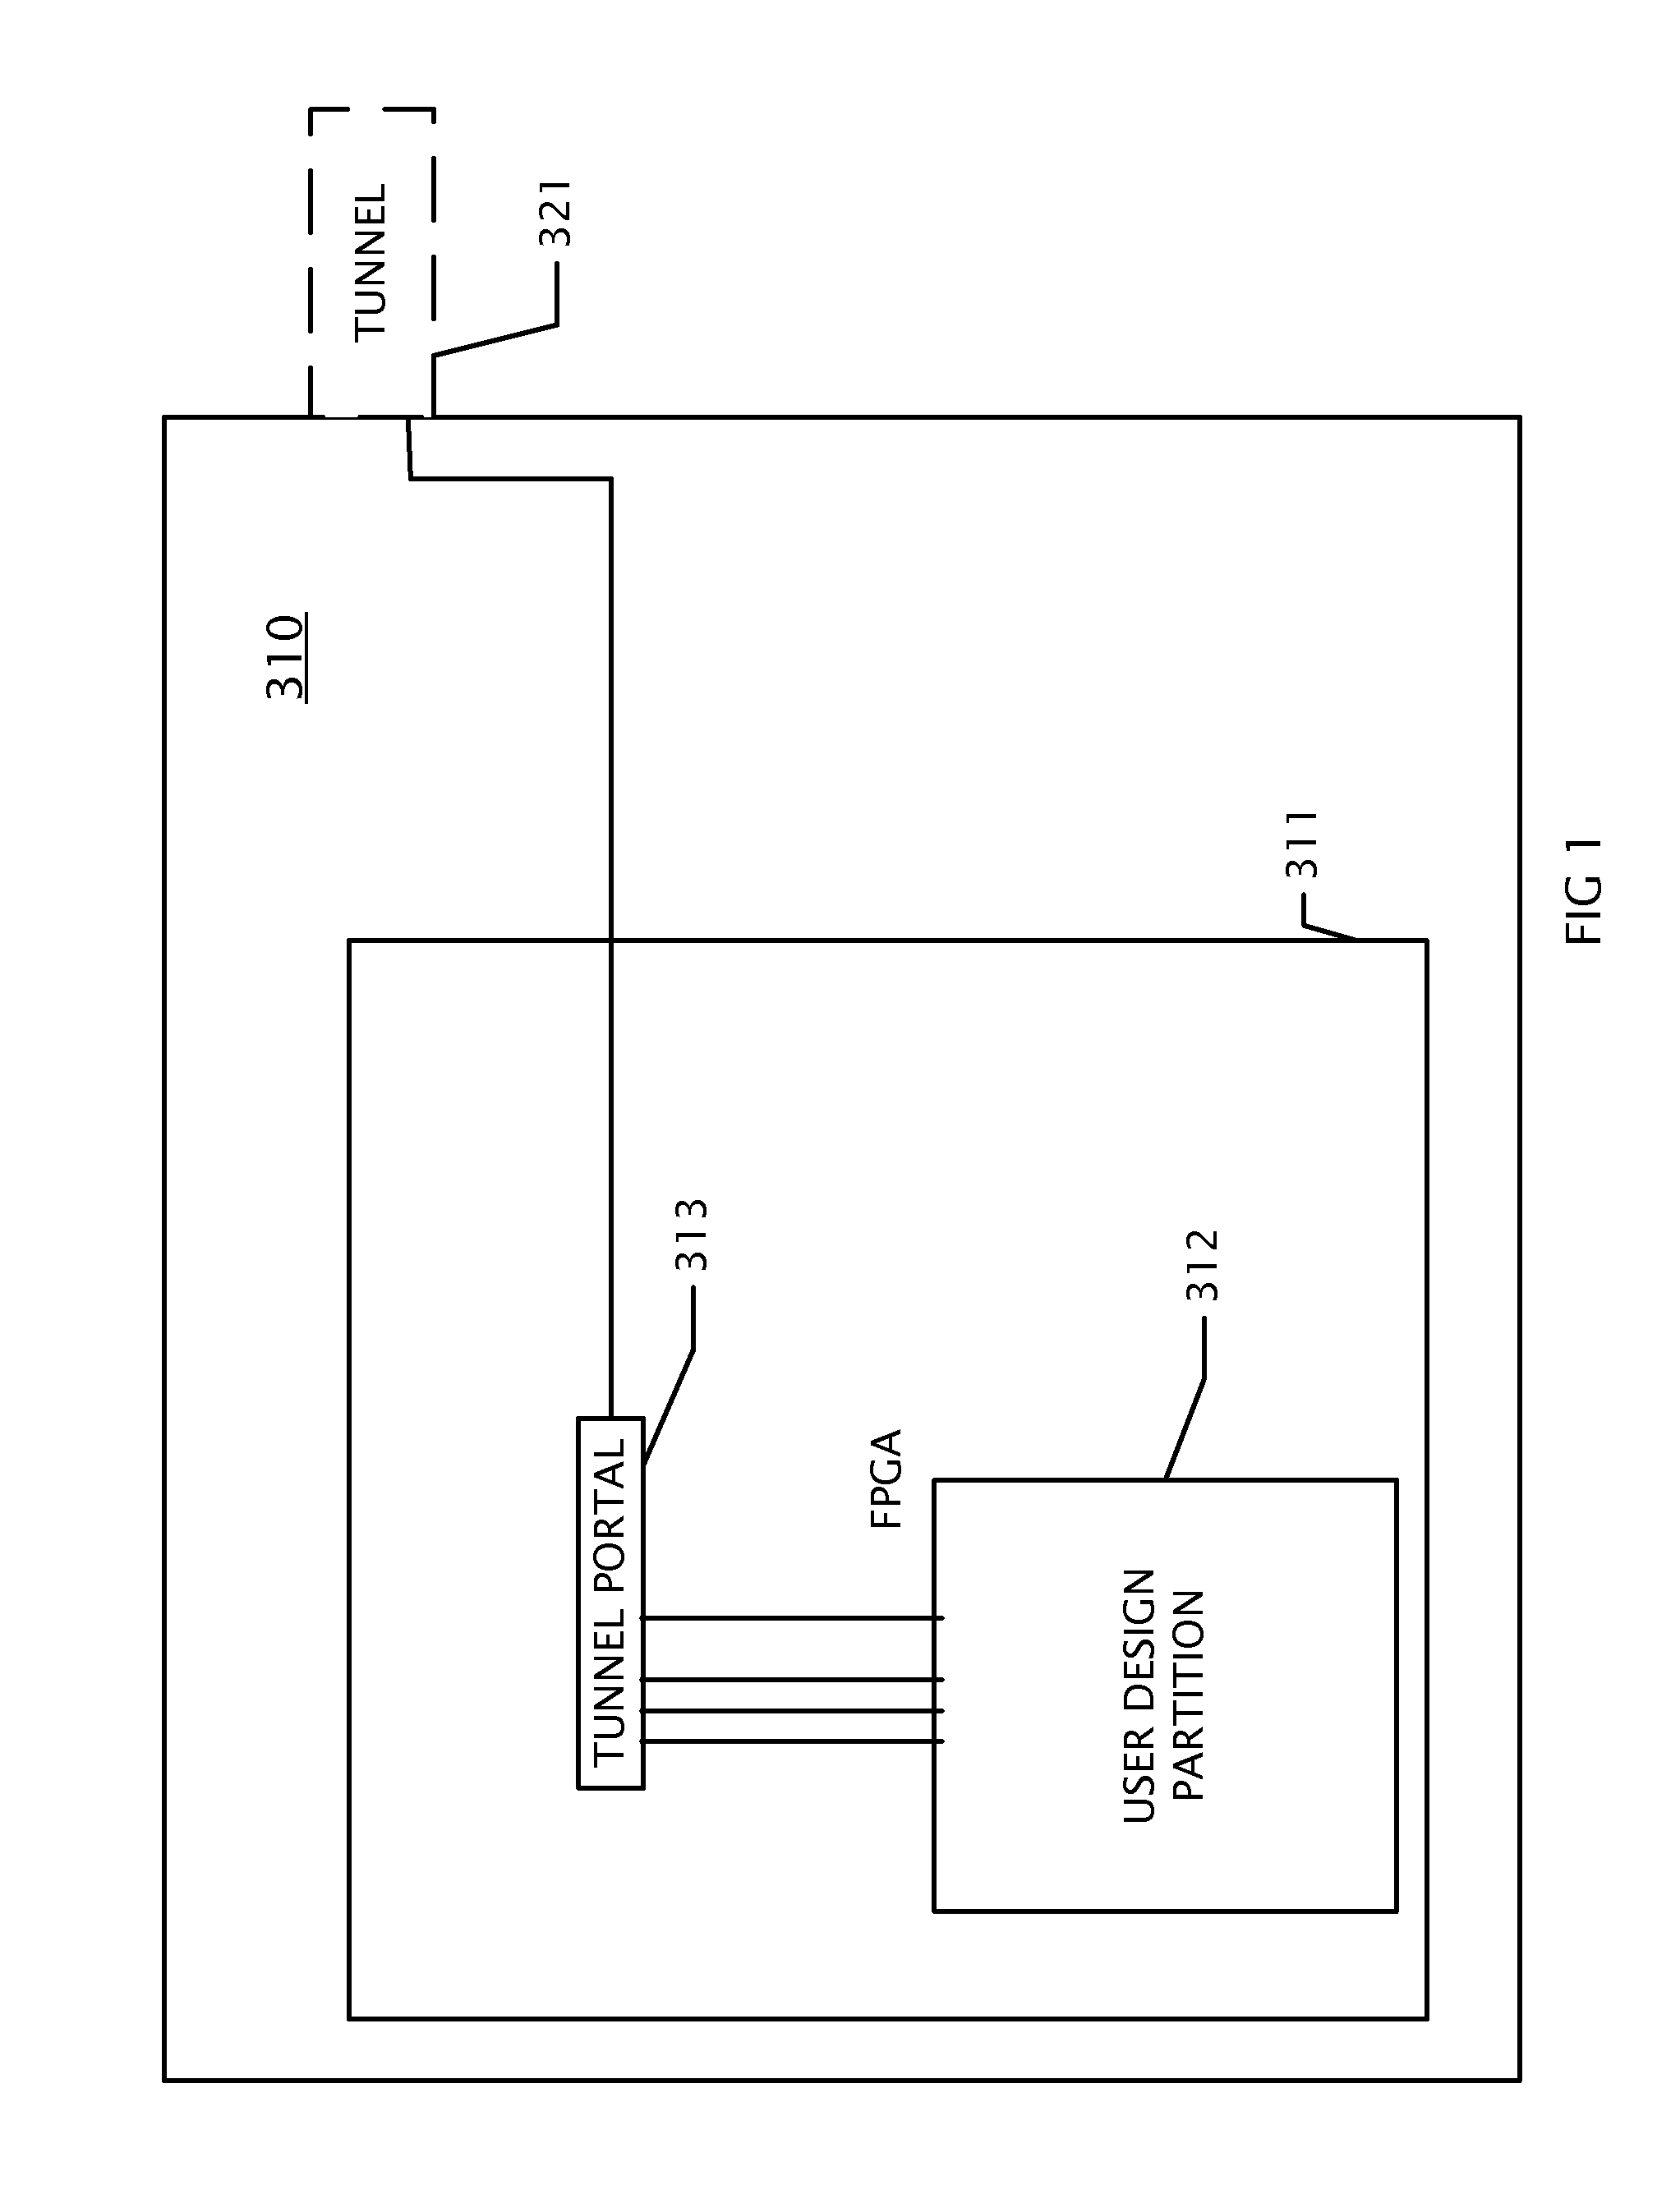 Logic verification module apparatus to serve as a hyper prototype for debugging an electronic design that exceeds the capacity of a single FPGA